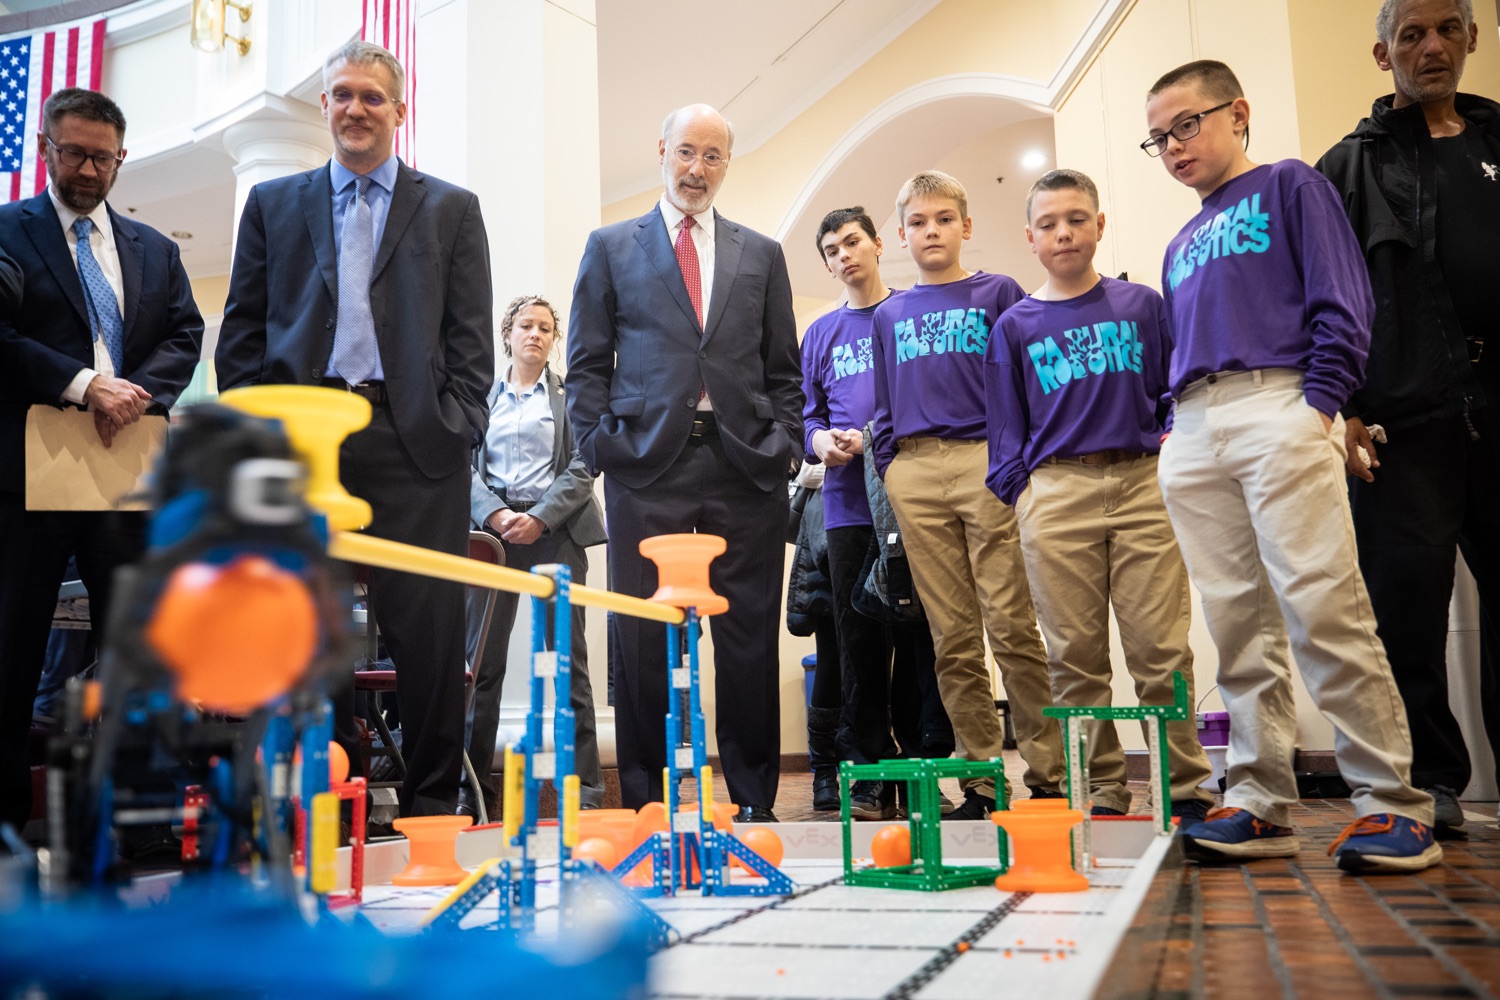 Pennsylvania Governor Tom Wolf meeting with students at the robotics demonstration.Celebrating the success of the PAsmart workforce development program to create educational opportunities at schools across the commonwealth, Governor Tom Wolf welcomed more than 50 students from the Pennsylvania Rural Robotics Initiative to the Capitol today. The students from nine western Pennsylvania school districts showcased their skills in coding, robotics and drone technology. The Wolf administration awarded the initiative a $299,000 PAsmart Advancing Grant earlier this year. Harrisburg, PA  Tuesday, November 12, 2019<br><a href="https://filesource.amperwave.net/commonwealthofpa/photo/17587_gov_pasmart_rural_robotics_dz_024.jpg" target="_blank">⇣ Download Photo</a>